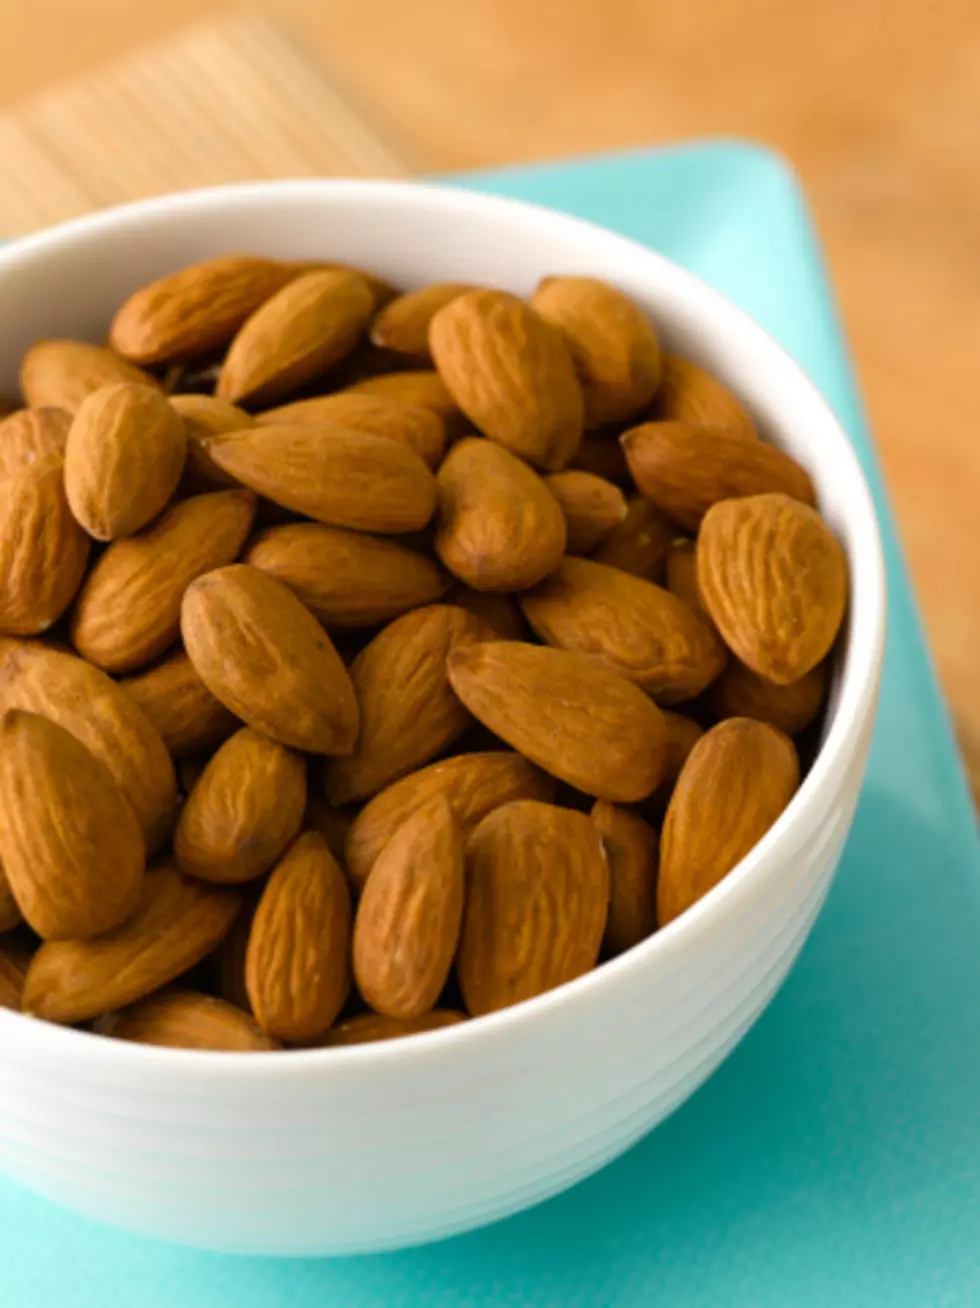 Want To Get Rid Of Your Belly Fat?  Eat A Handful Of These